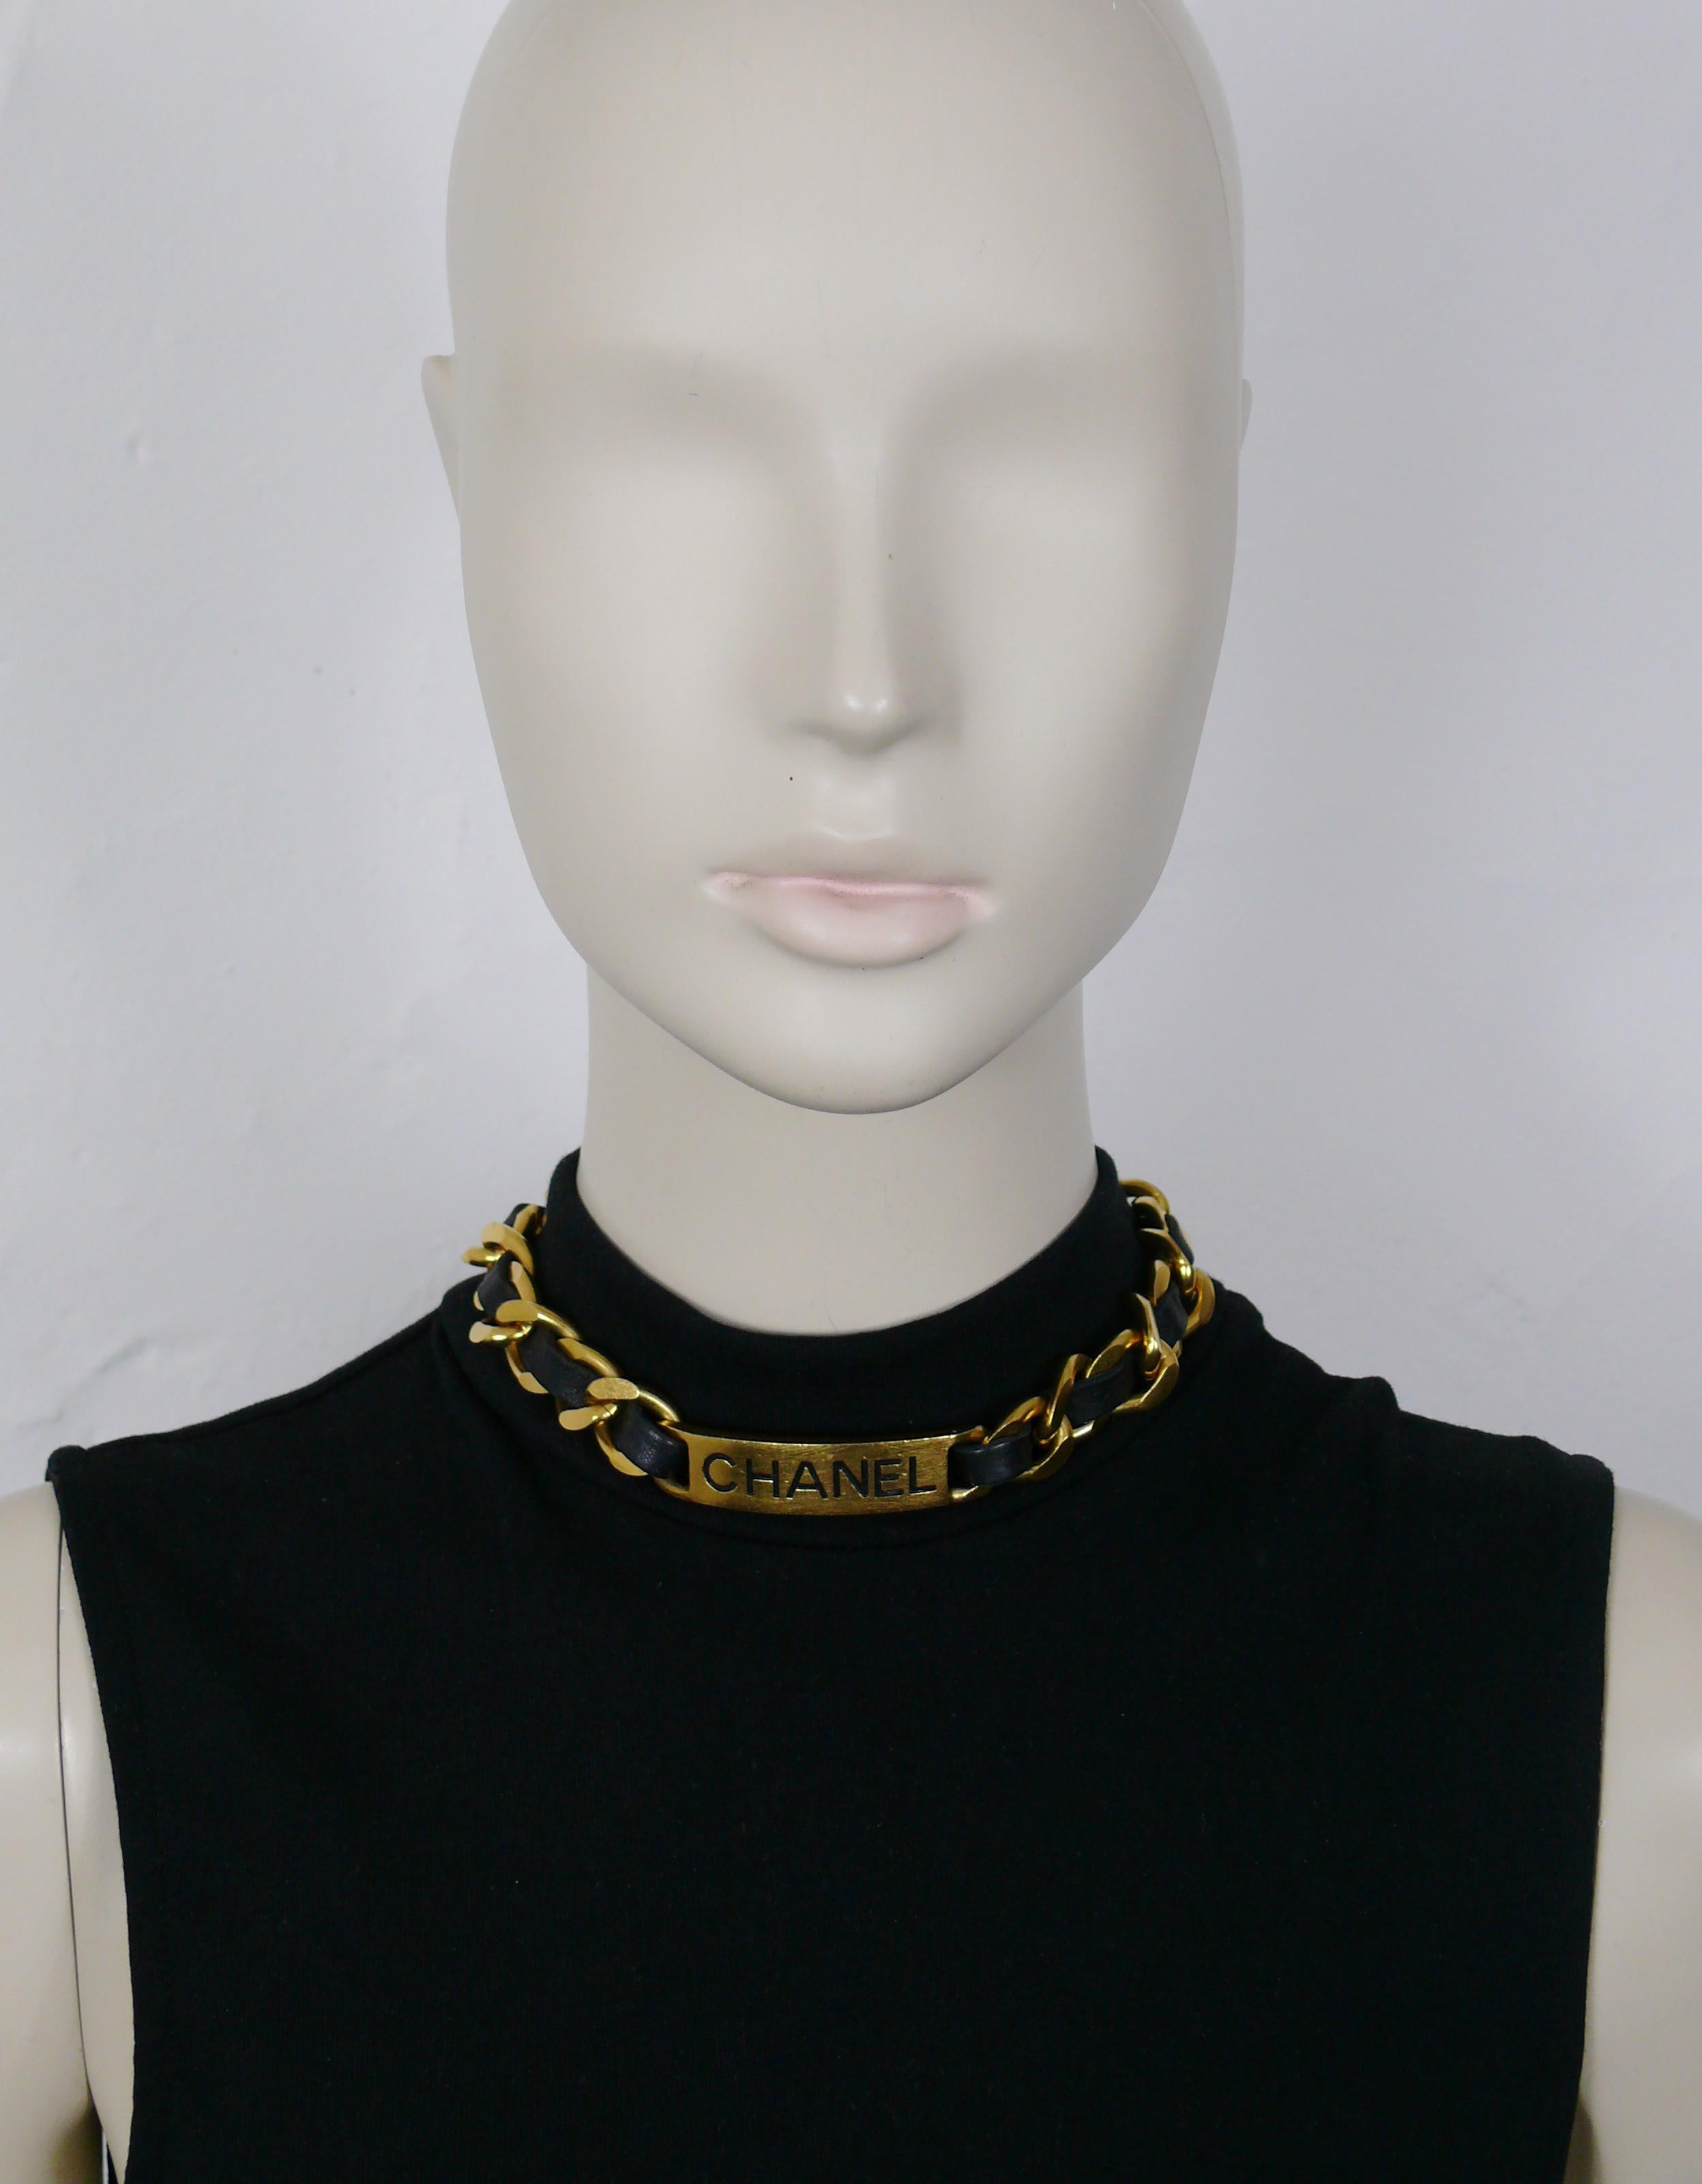 CHANEL vintage rare gold toned chunky chain collar necklace with intertwined black leather and featuring an ID Tag embossed CHANEL.

From the Spring 1995 Collection.

Adjustble hook closure.

Embossed CHANEL 95P Made in France.

Indicative